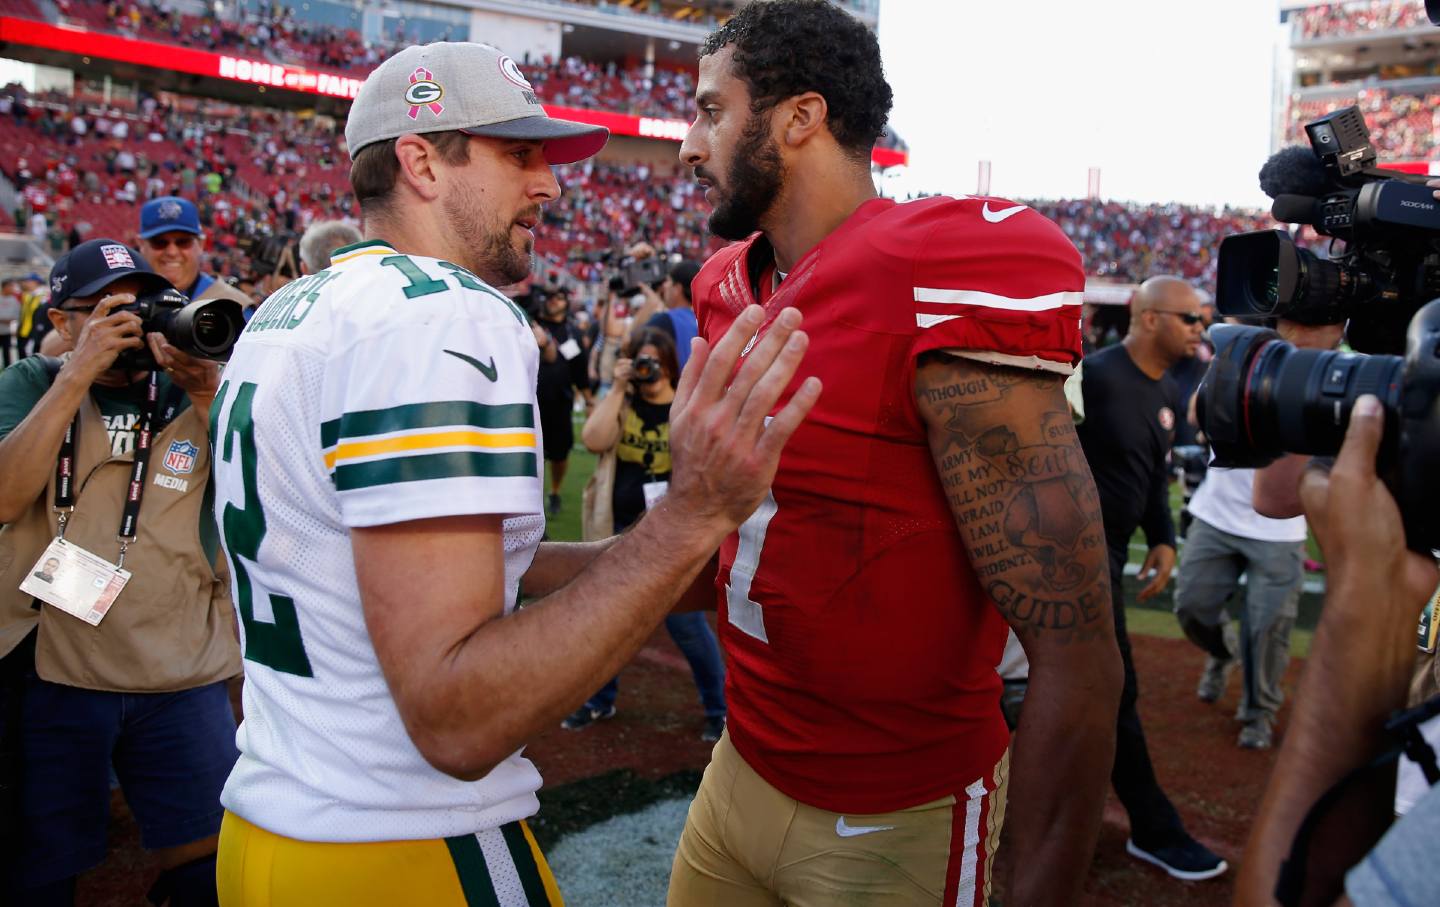 Colin Kaepernick, #7 of the San Francisco 49ers, talks with Aaron Rodgers, #12 of the Green Bay Packers, after their game on October 4, 2015, in Santa Clara, Calif.